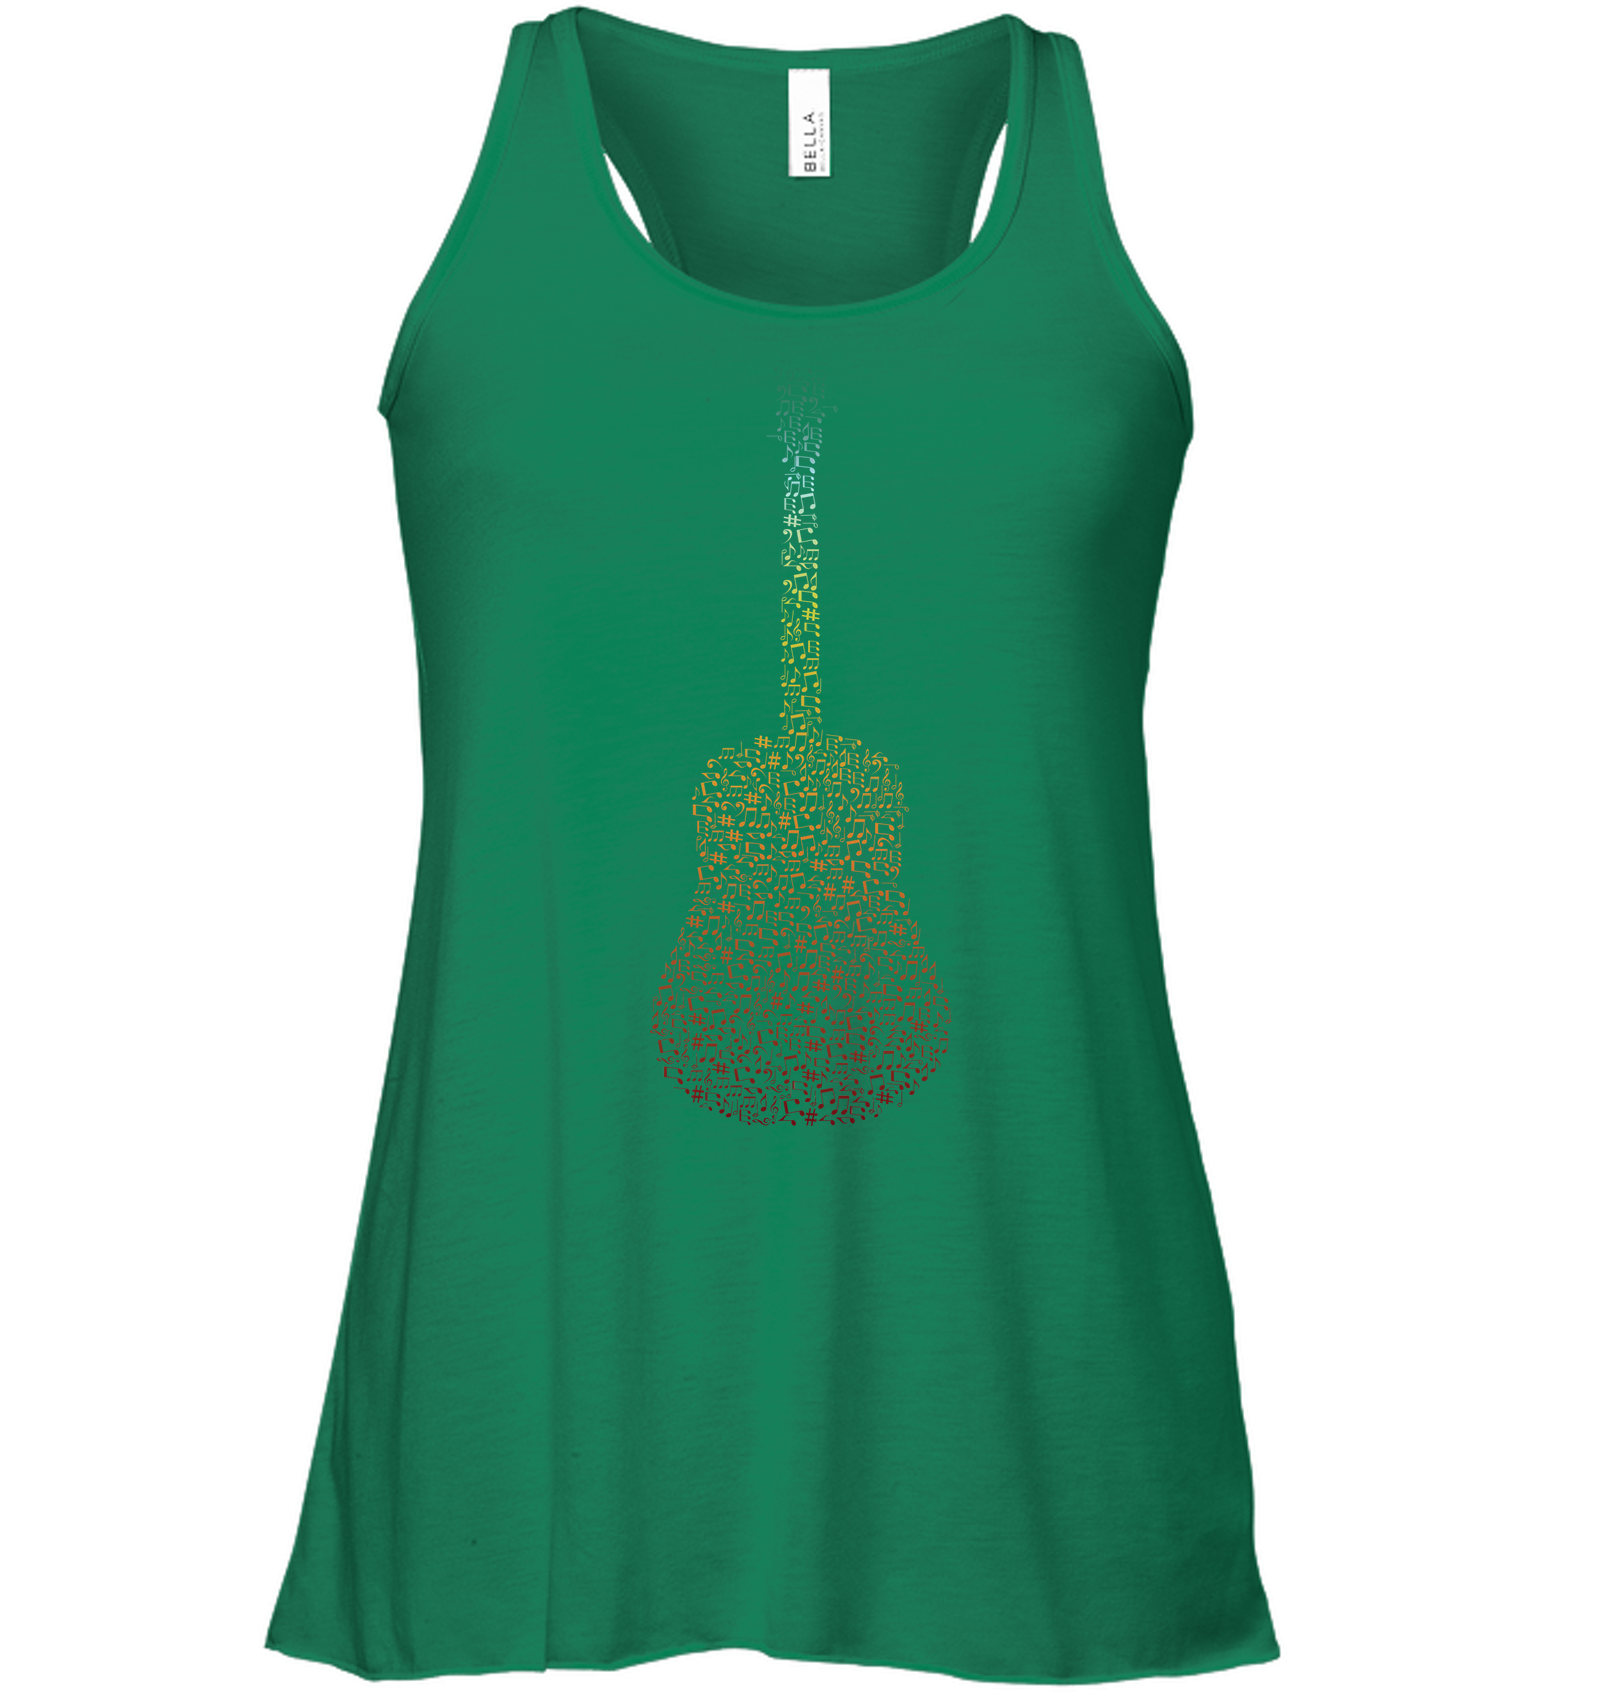 Guitar made of Notes - Bella + Canvas Women's Flowy Racerback Tank